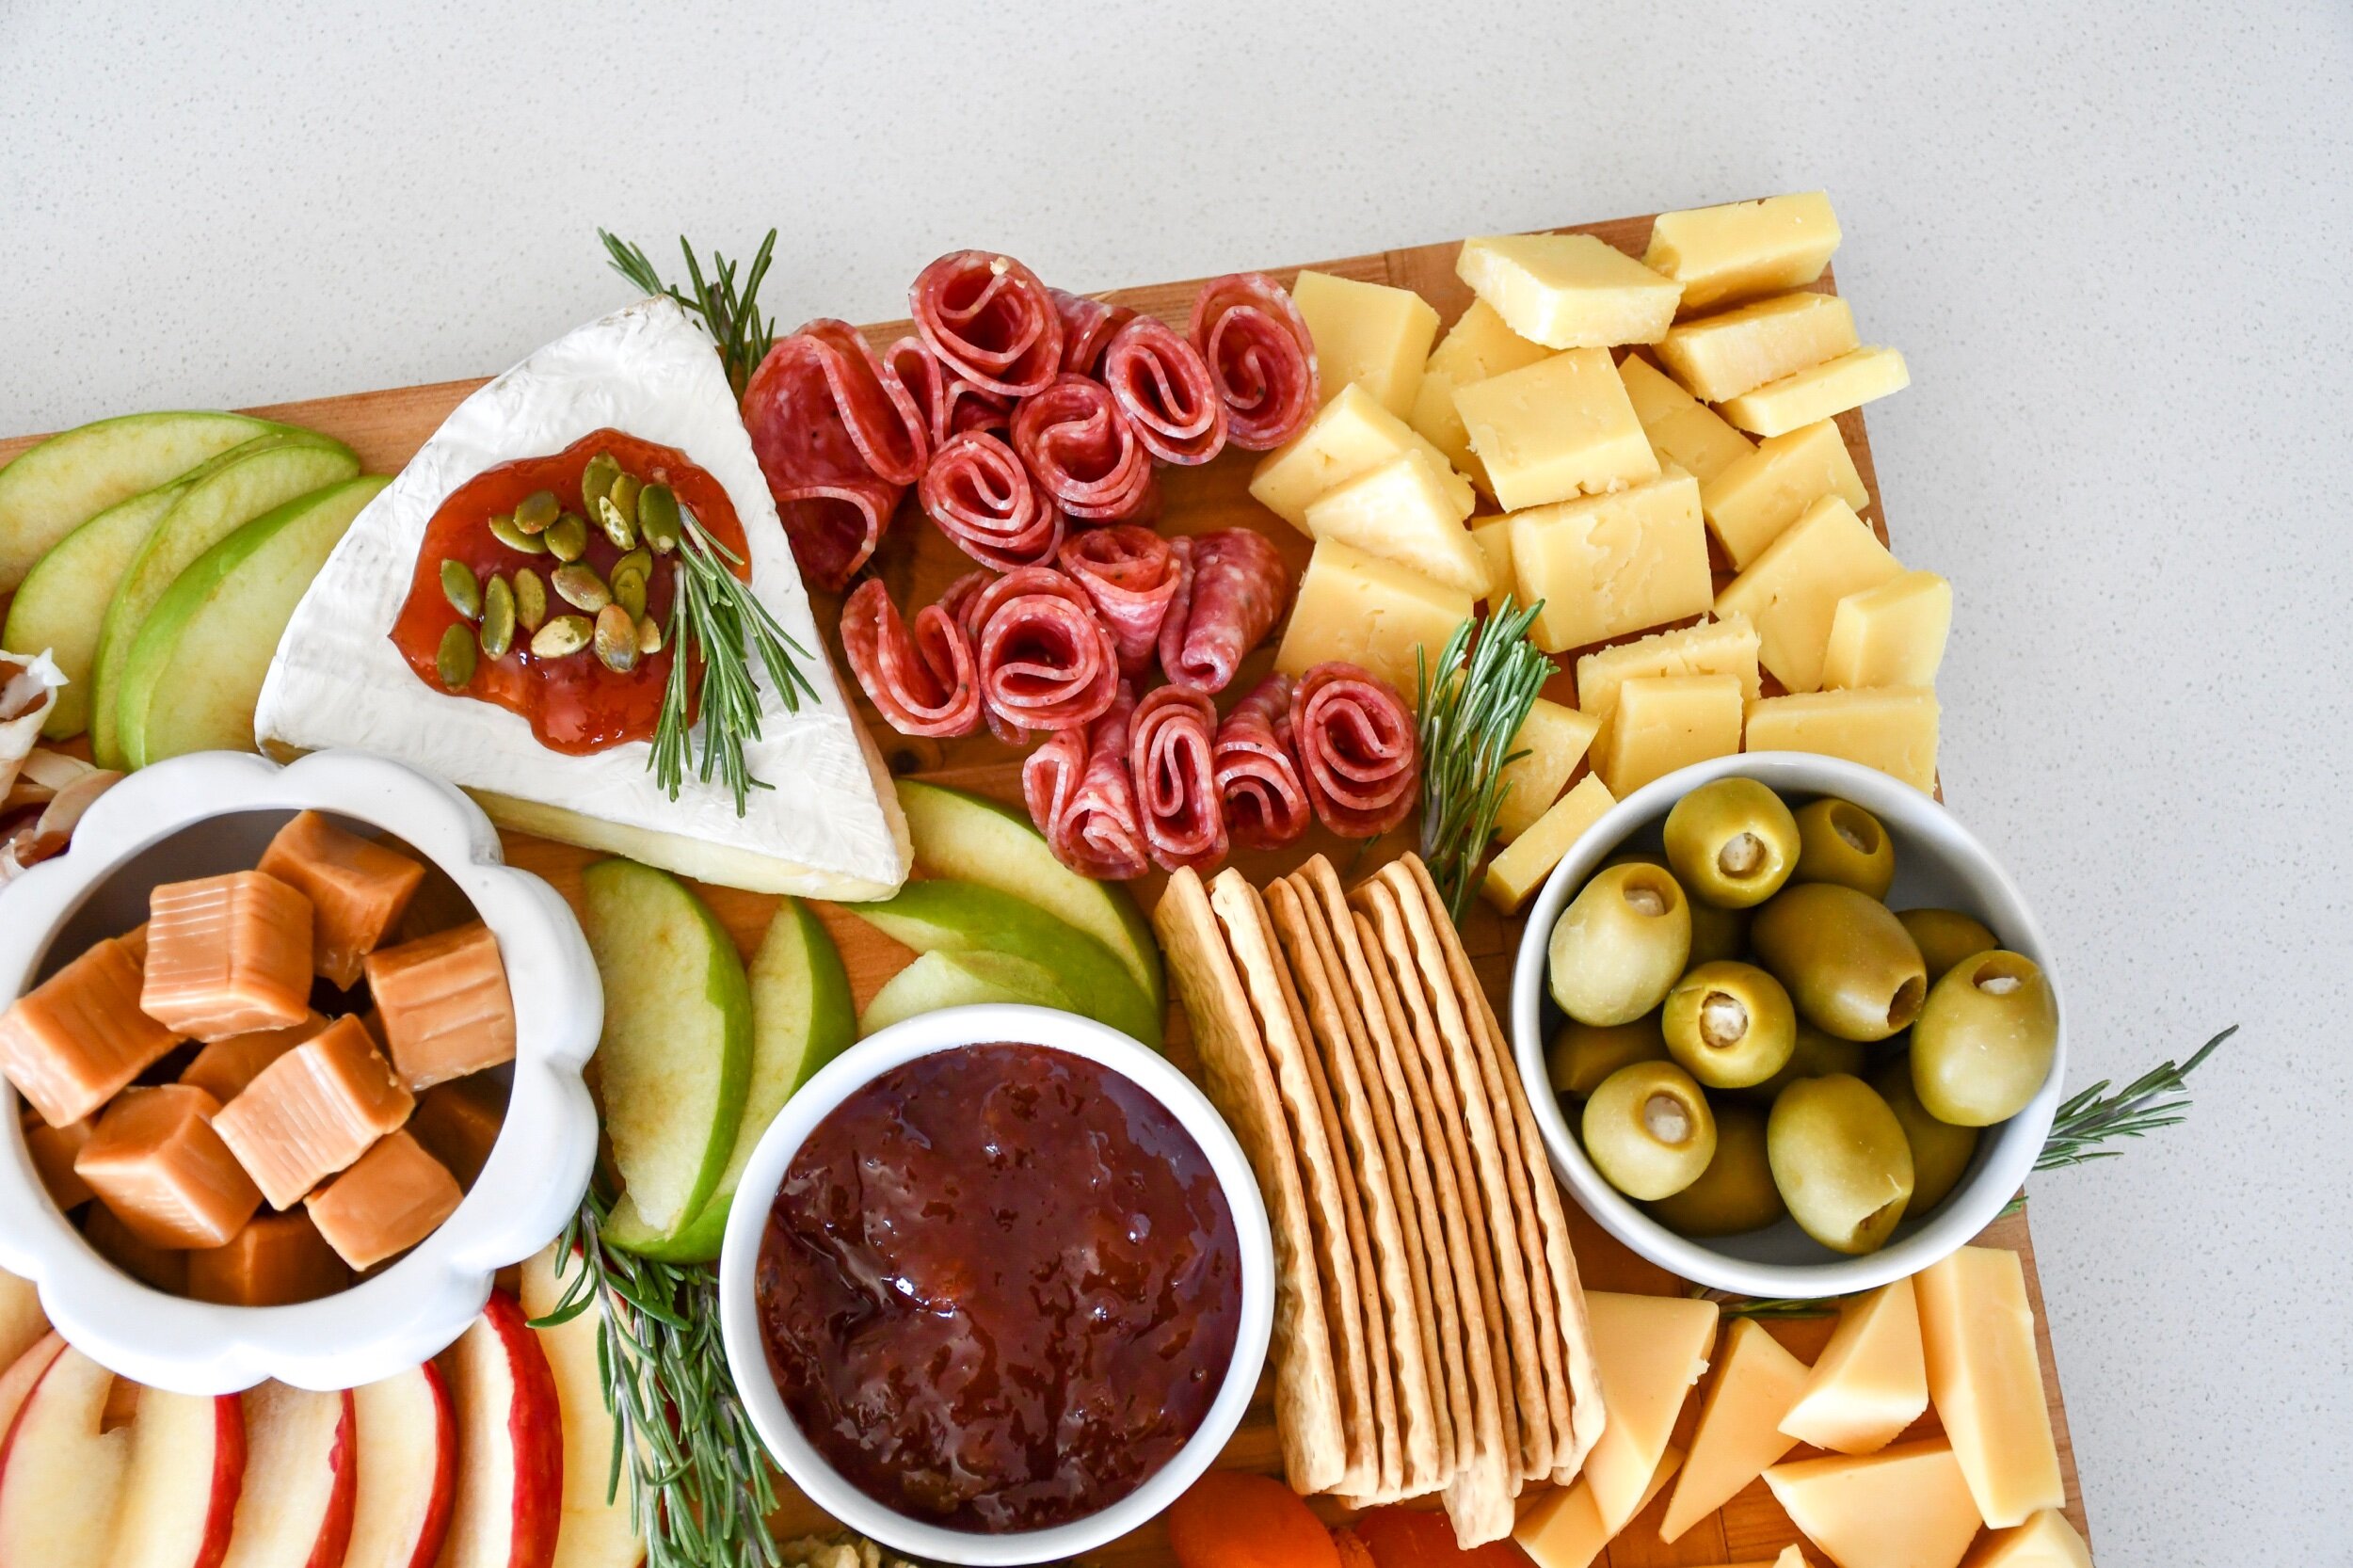 Fall Inspired Charcuterie Board | tarynintotravel.com |  #cheeseboard #partyfood #foodcenterpiece #charcuterieboard